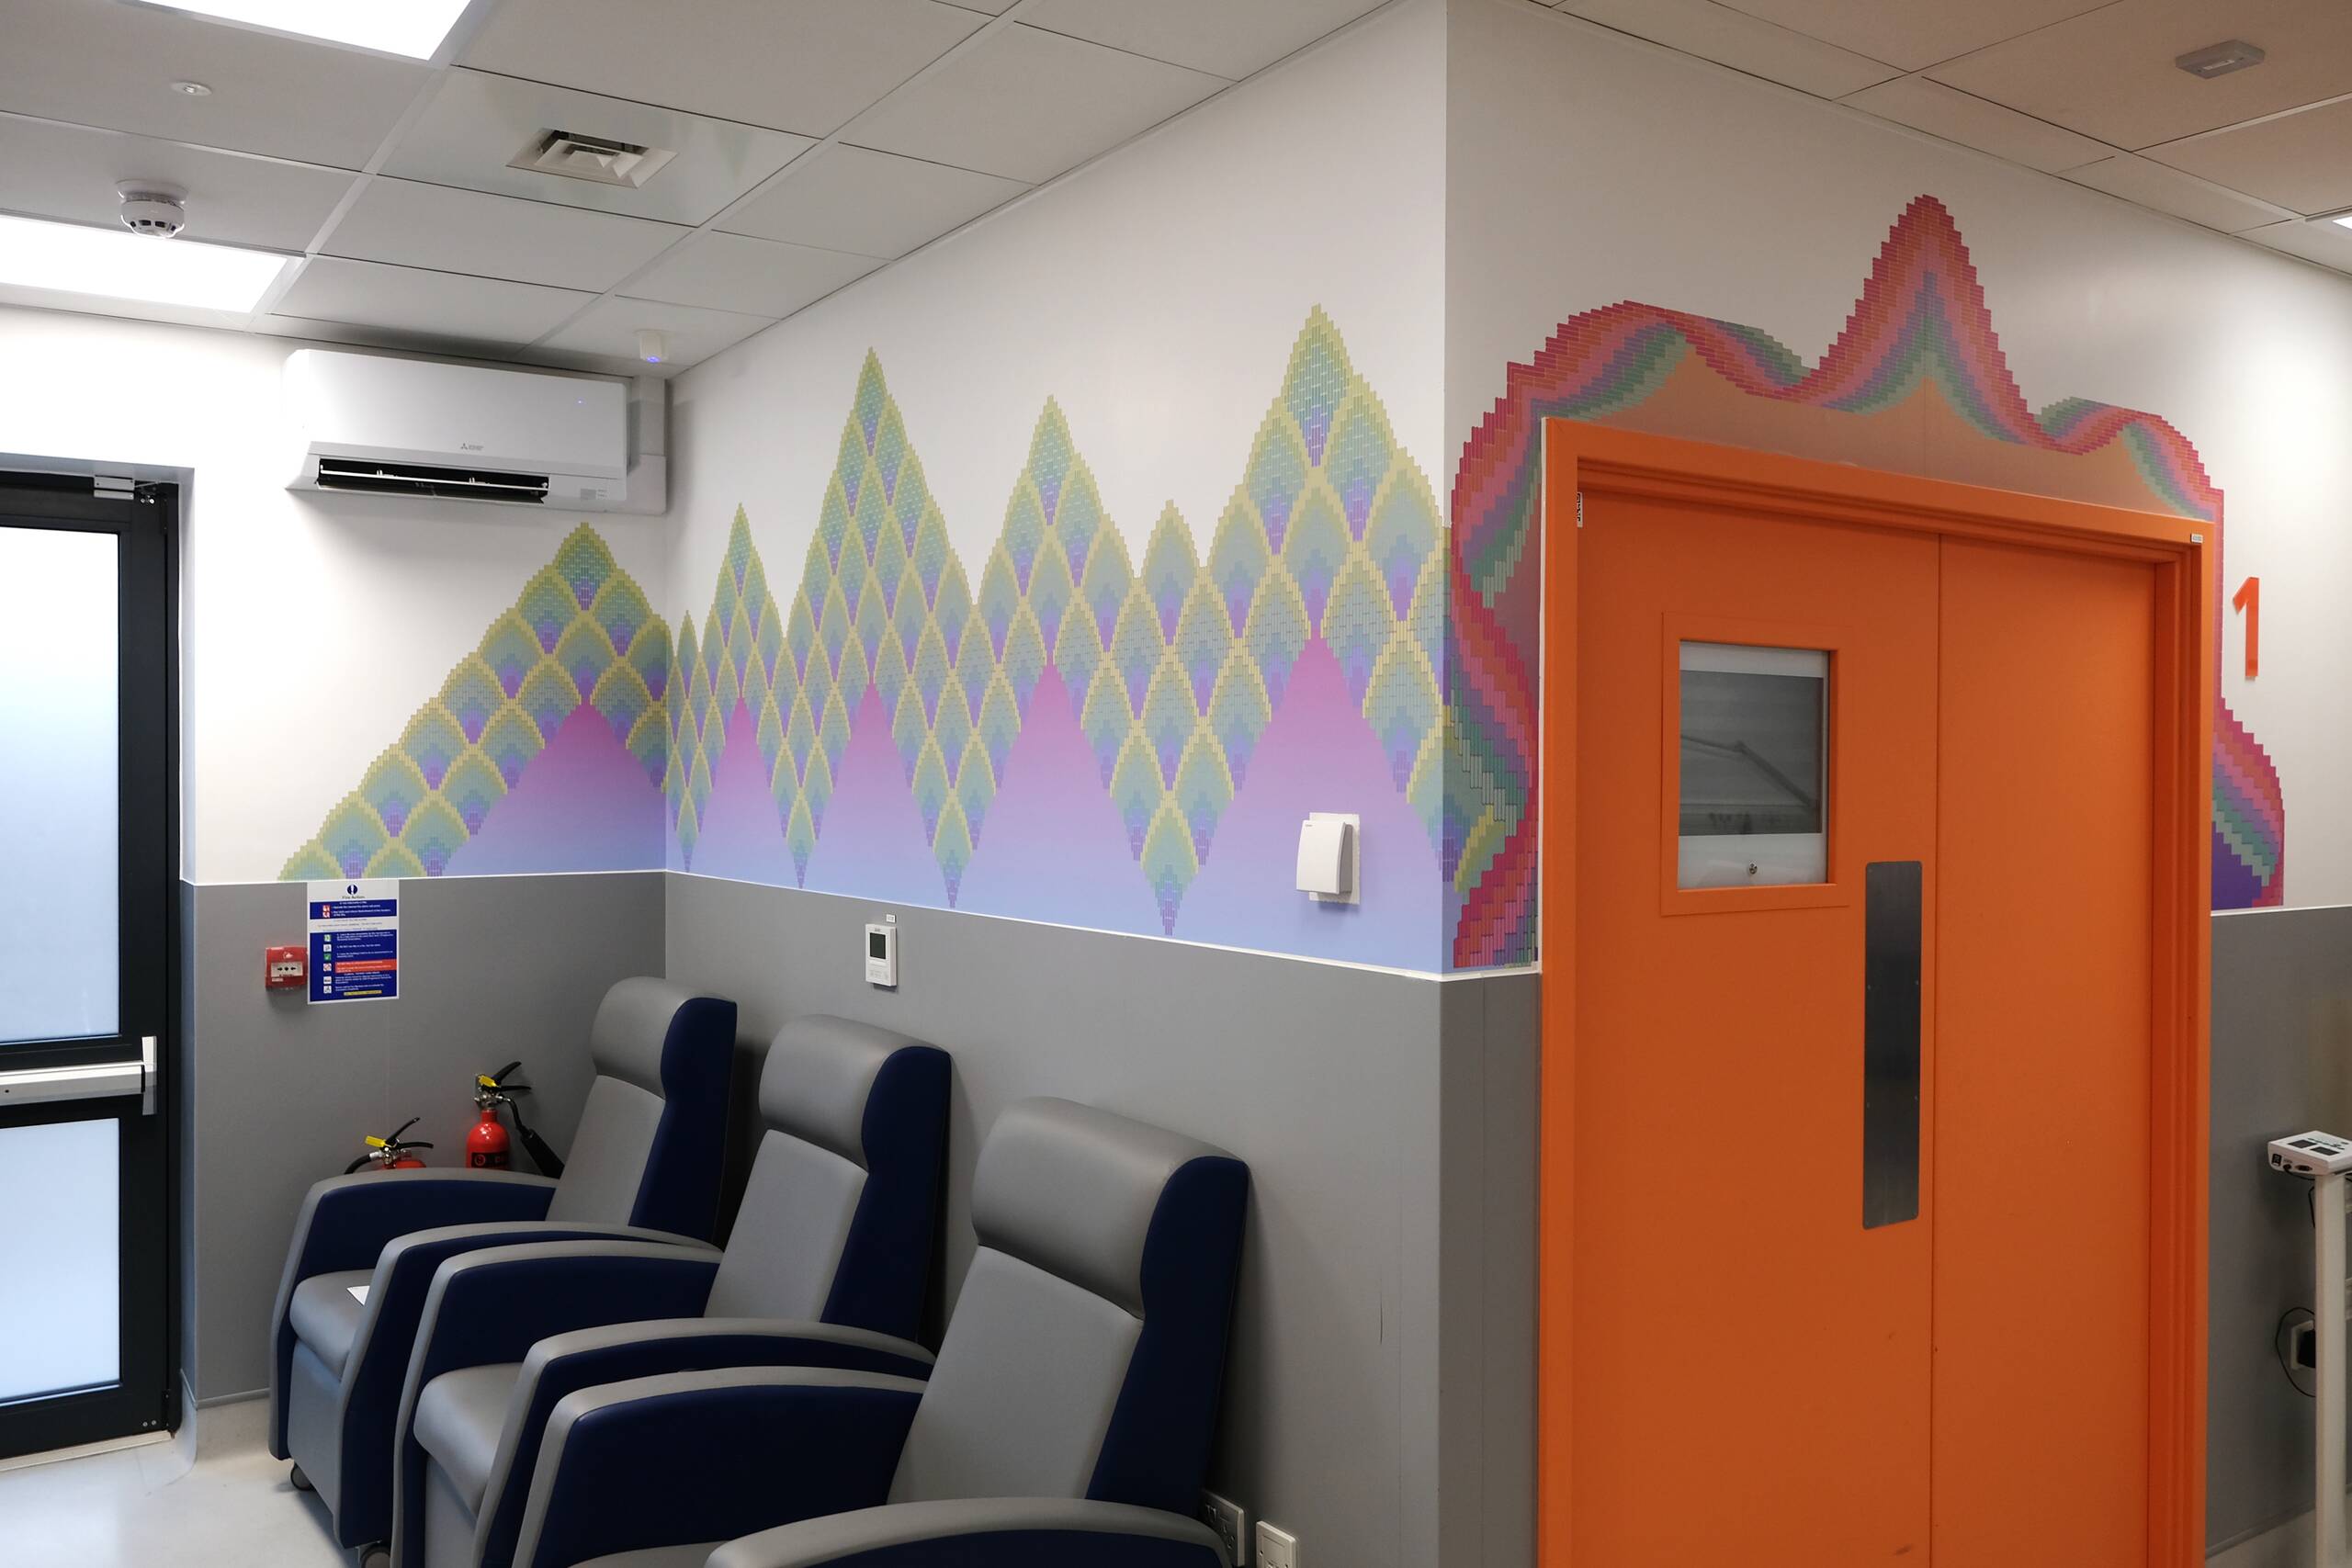 Stitch Space, Printed vinyl and framed works on paper, commissioned by Vital Art/ NHS for permanent installation at Newham Hospital, London, 2022